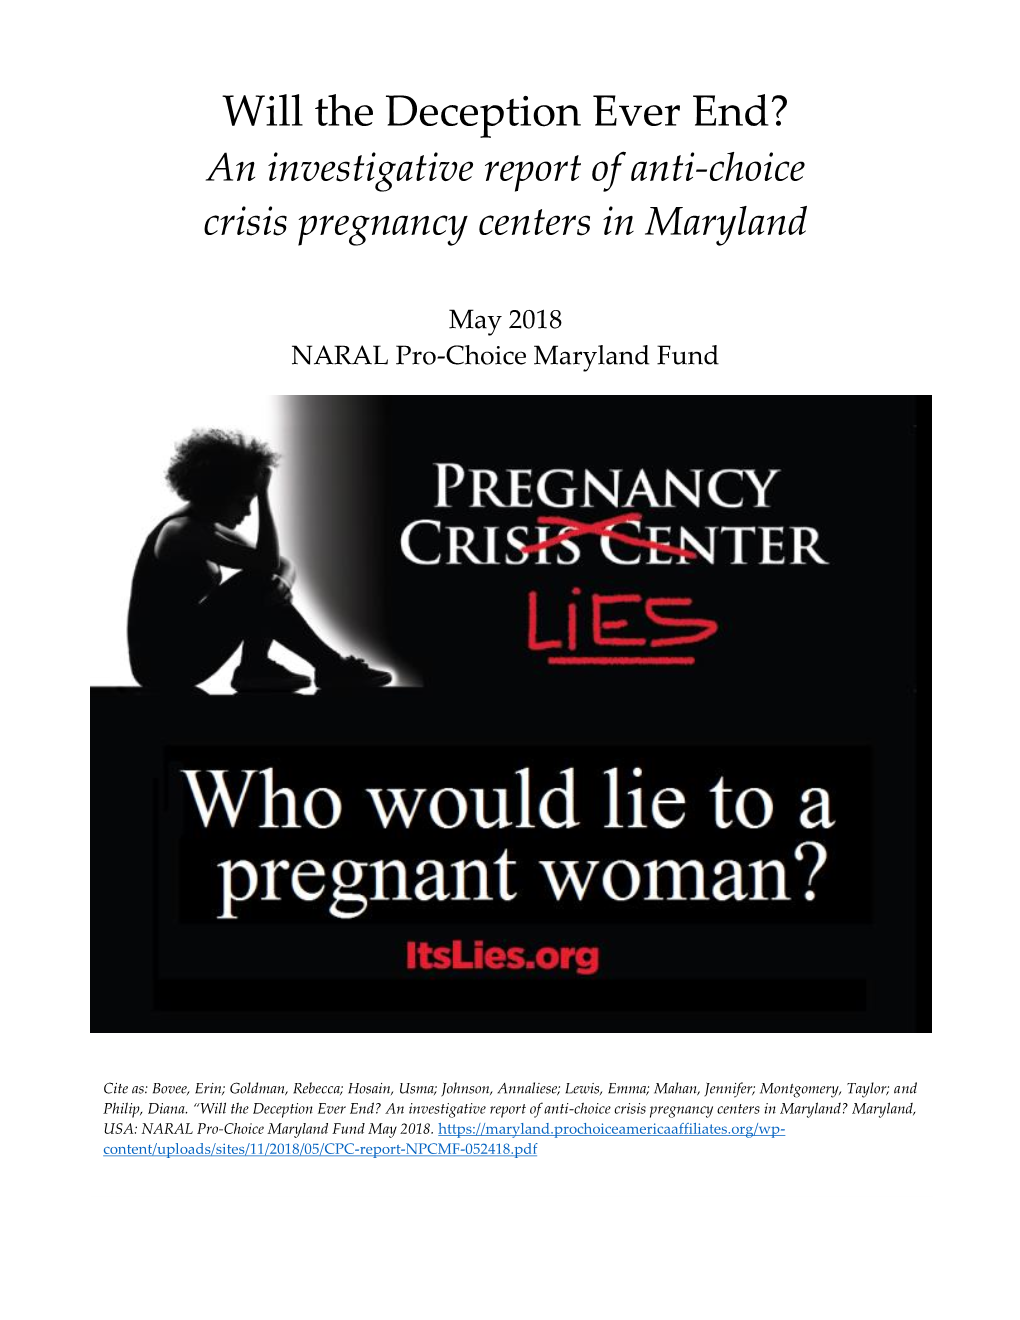 Will the Deception Ever End? an Investigative Report of Anti-Choice Crisis Pregnancy Centers in Maryland